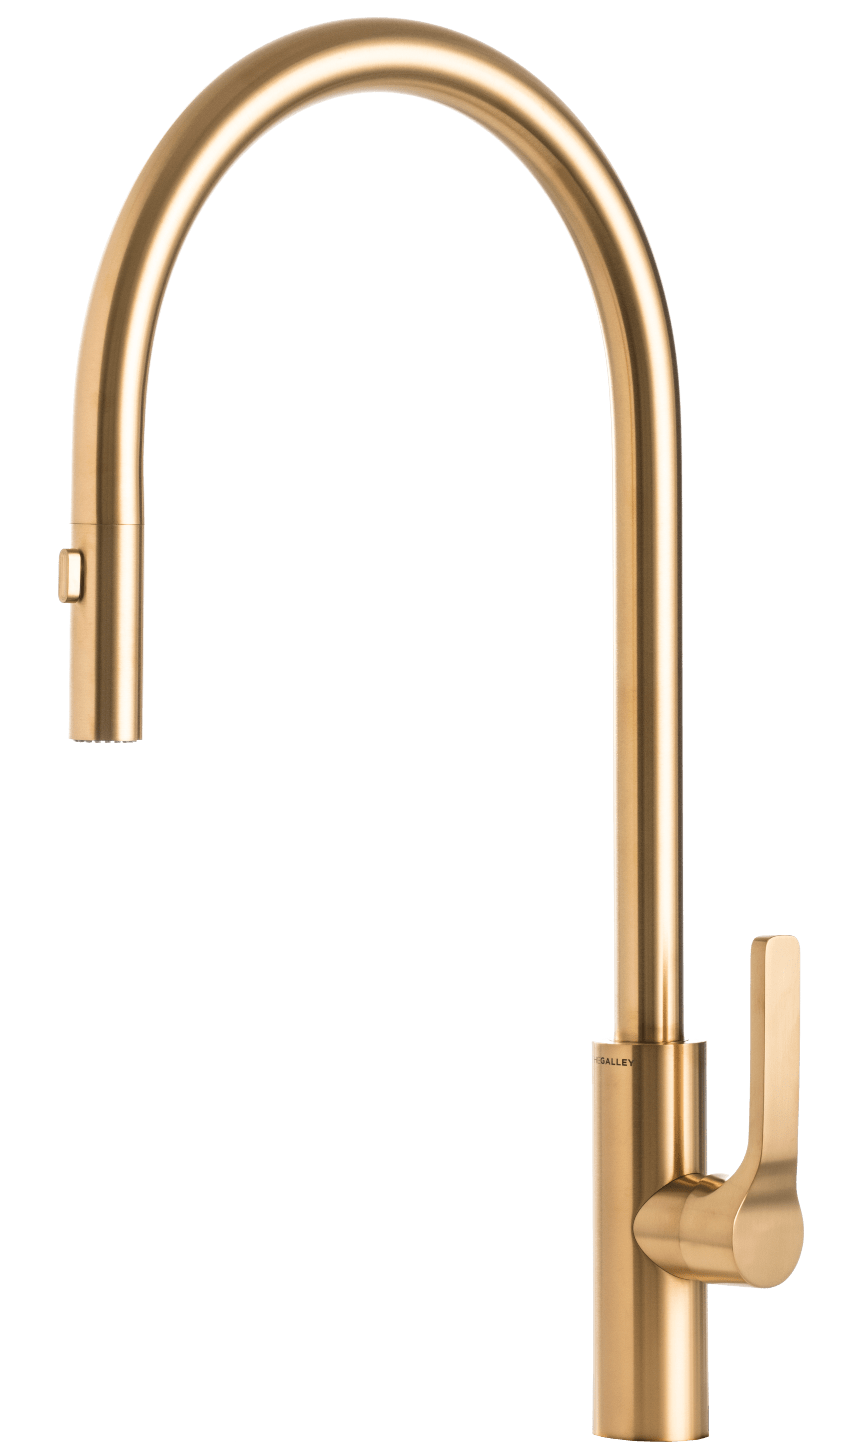 The Galley Ideal Tap High Flow